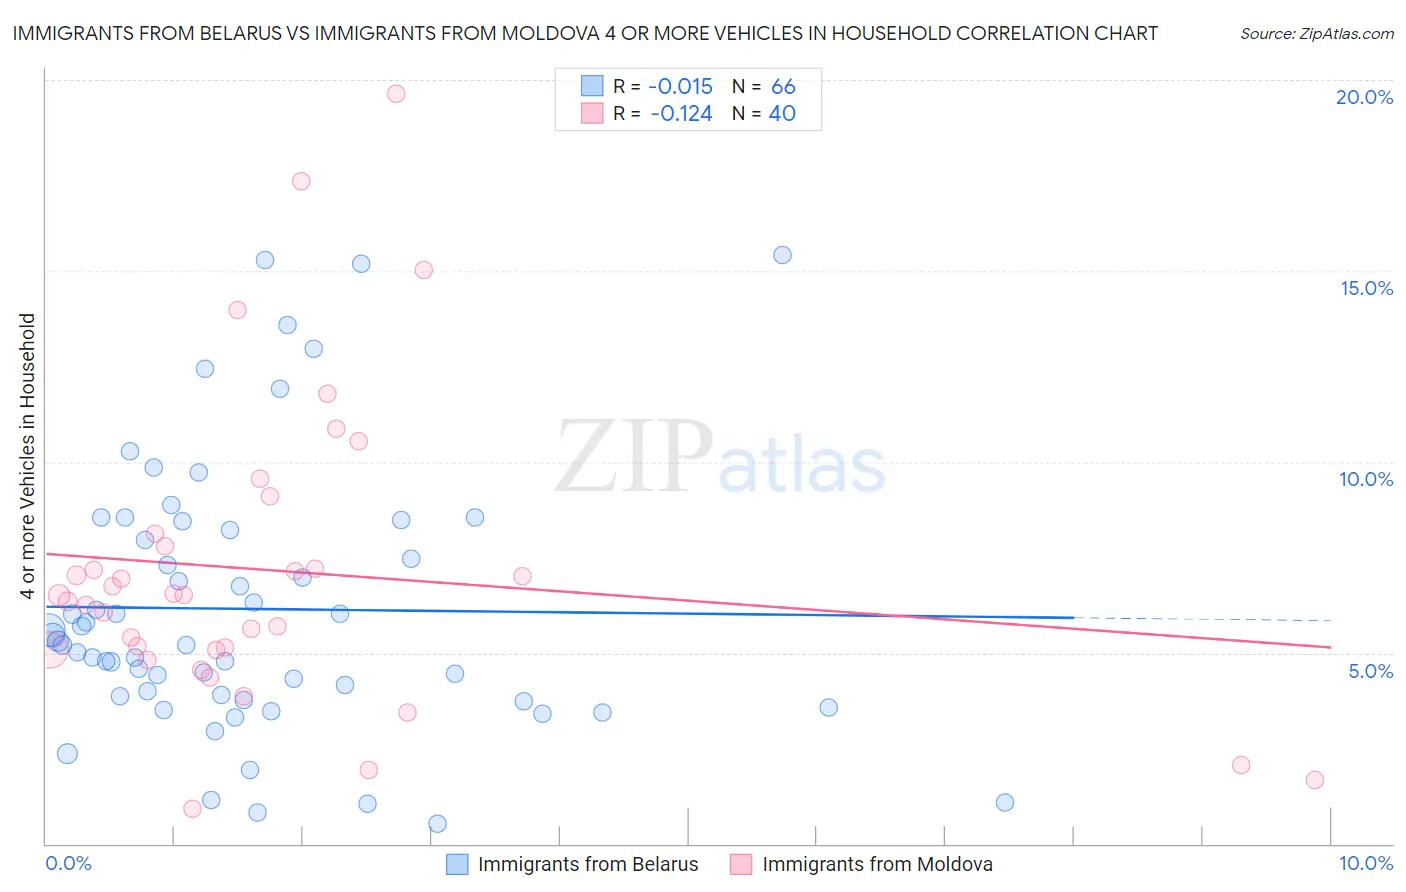 Immigrants from Belarus vs Immigrants from Moldova 4 or more Vehicles in Household